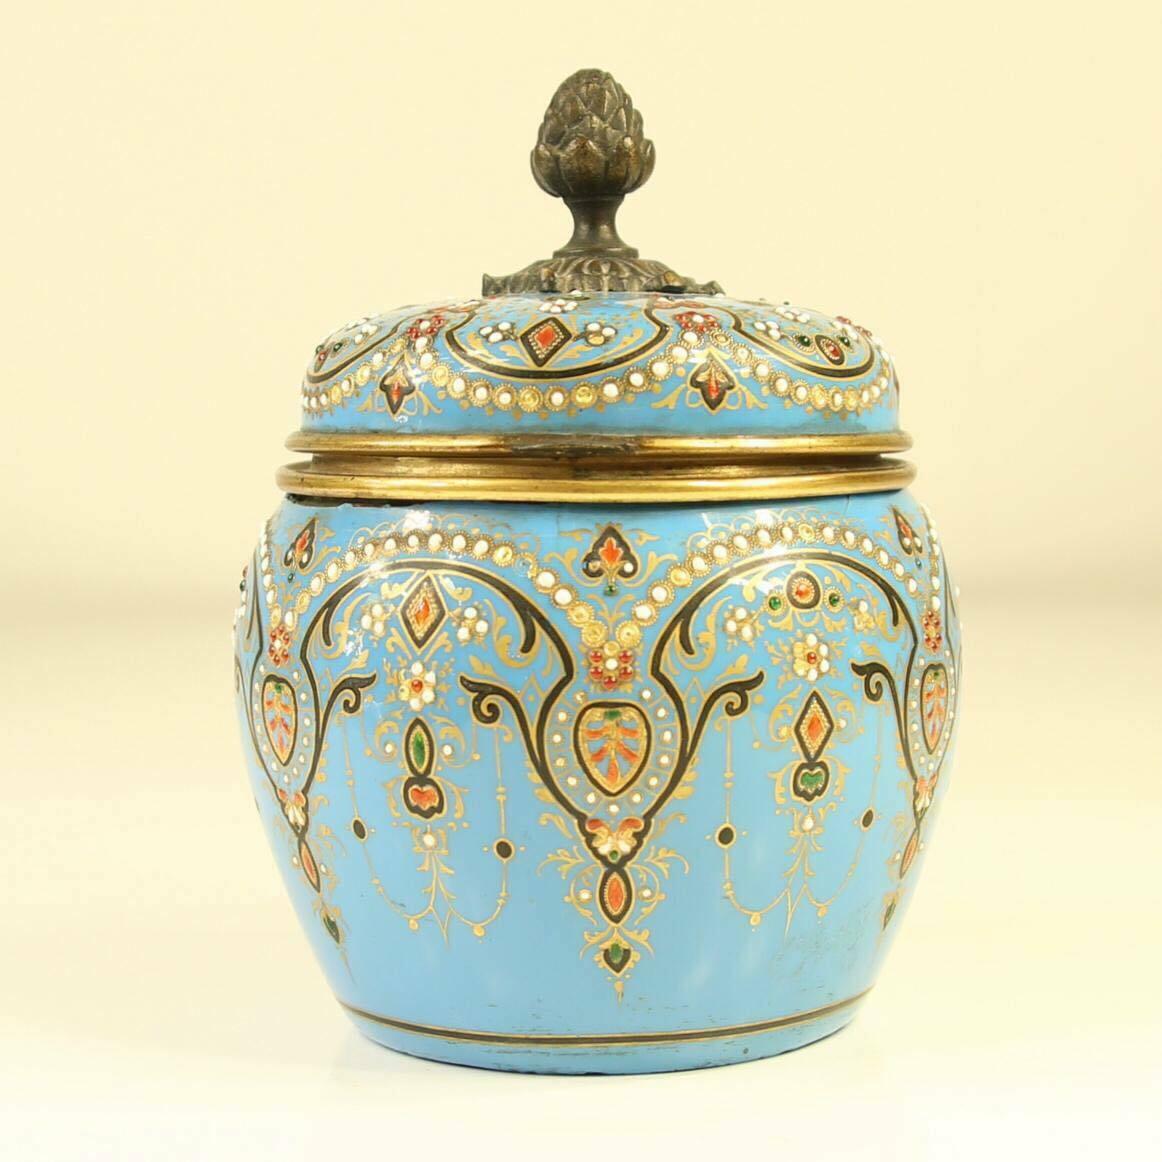 A superb 19th Century French jewelled turquoise enamel jar with hinged cover containing 4 original glass sent bottles with ornate lids.
Very rare and beautiful item in very good original antique condition, a few gems missing from the body however